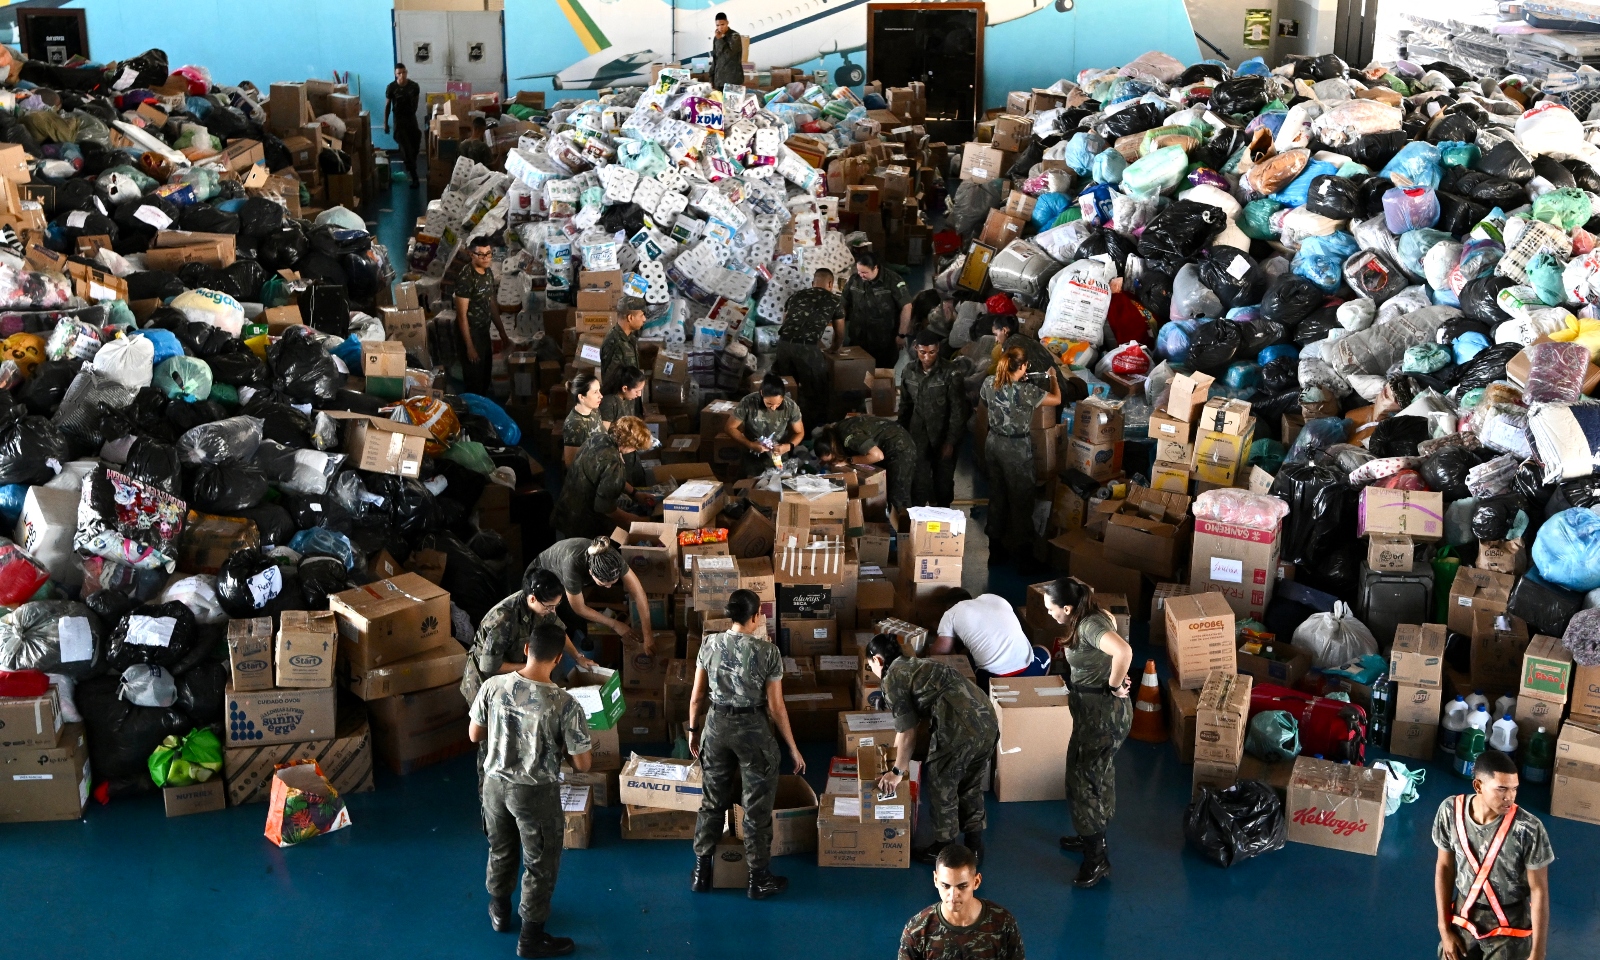 Soldiers in uniform stand in front of a mountain of donated goods in boxes.